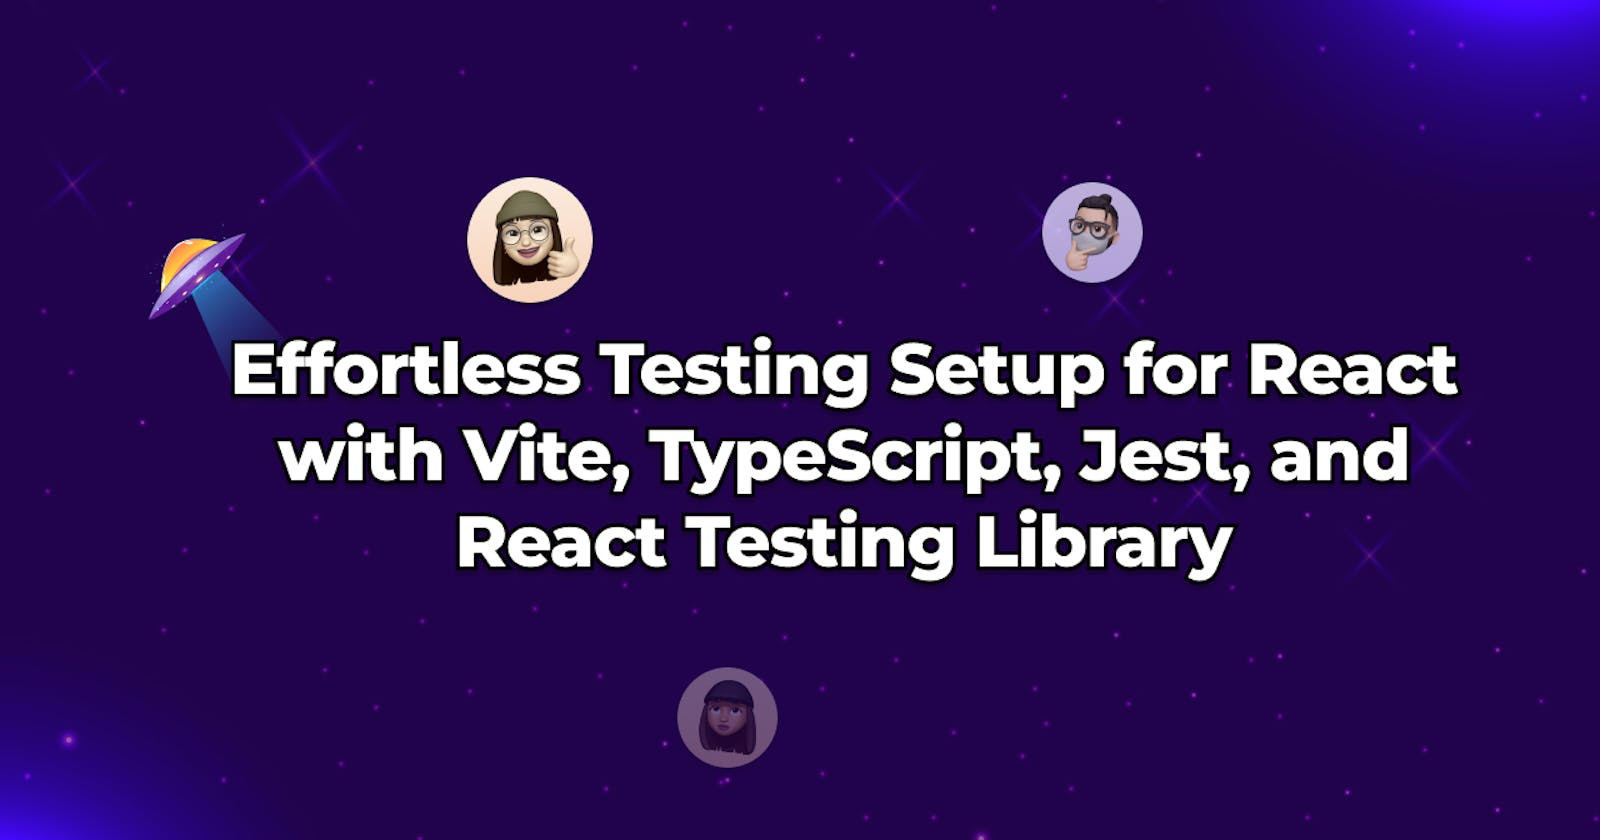 Effortless Testing Setup for React with Vite, TypeScript, Jest, and React Testing Library